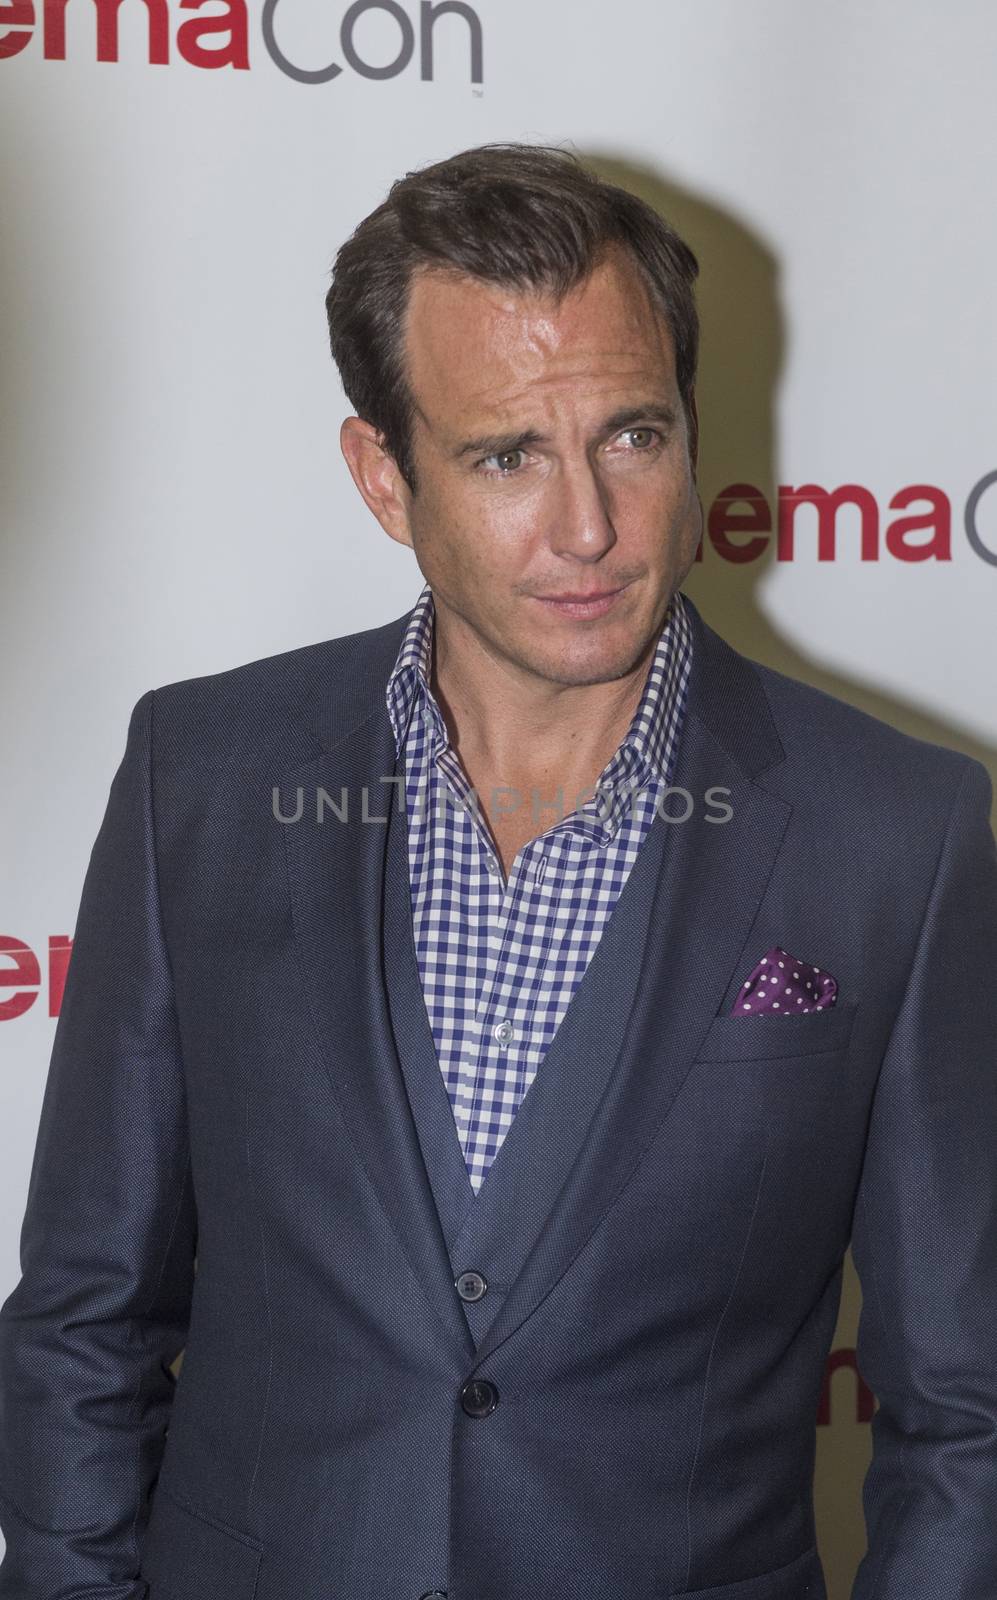 LAS VEGAS, NV - MARCH 24: Actor Will Arnett arrives at the 2014 CinemaCon Paramount opening night presentation at Caesars Palace on March 24, 2014 in Las Vegas, Nevada